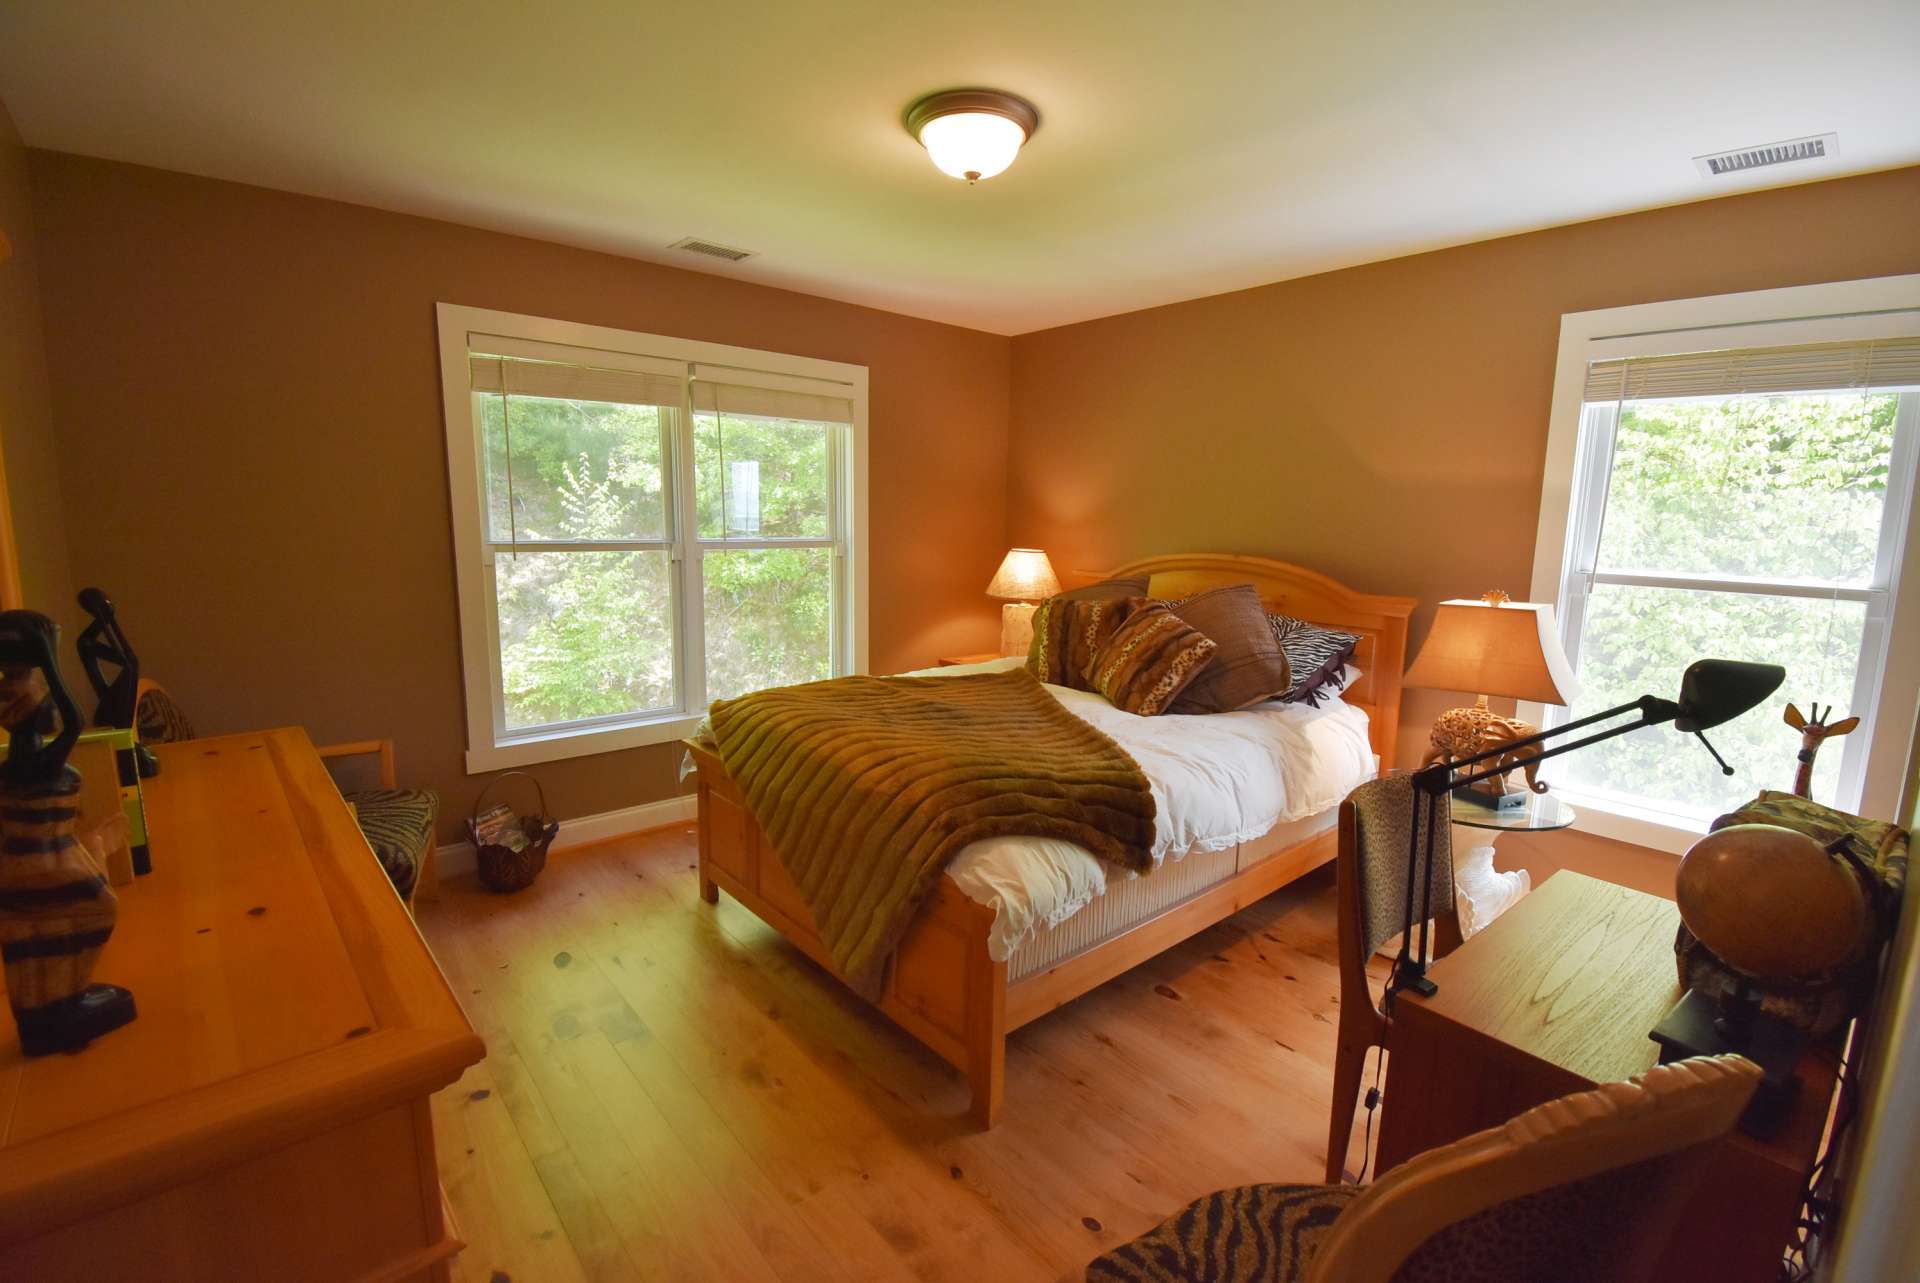 The upper level also offers two guest bedrooms, a bonus room, and a full bath.